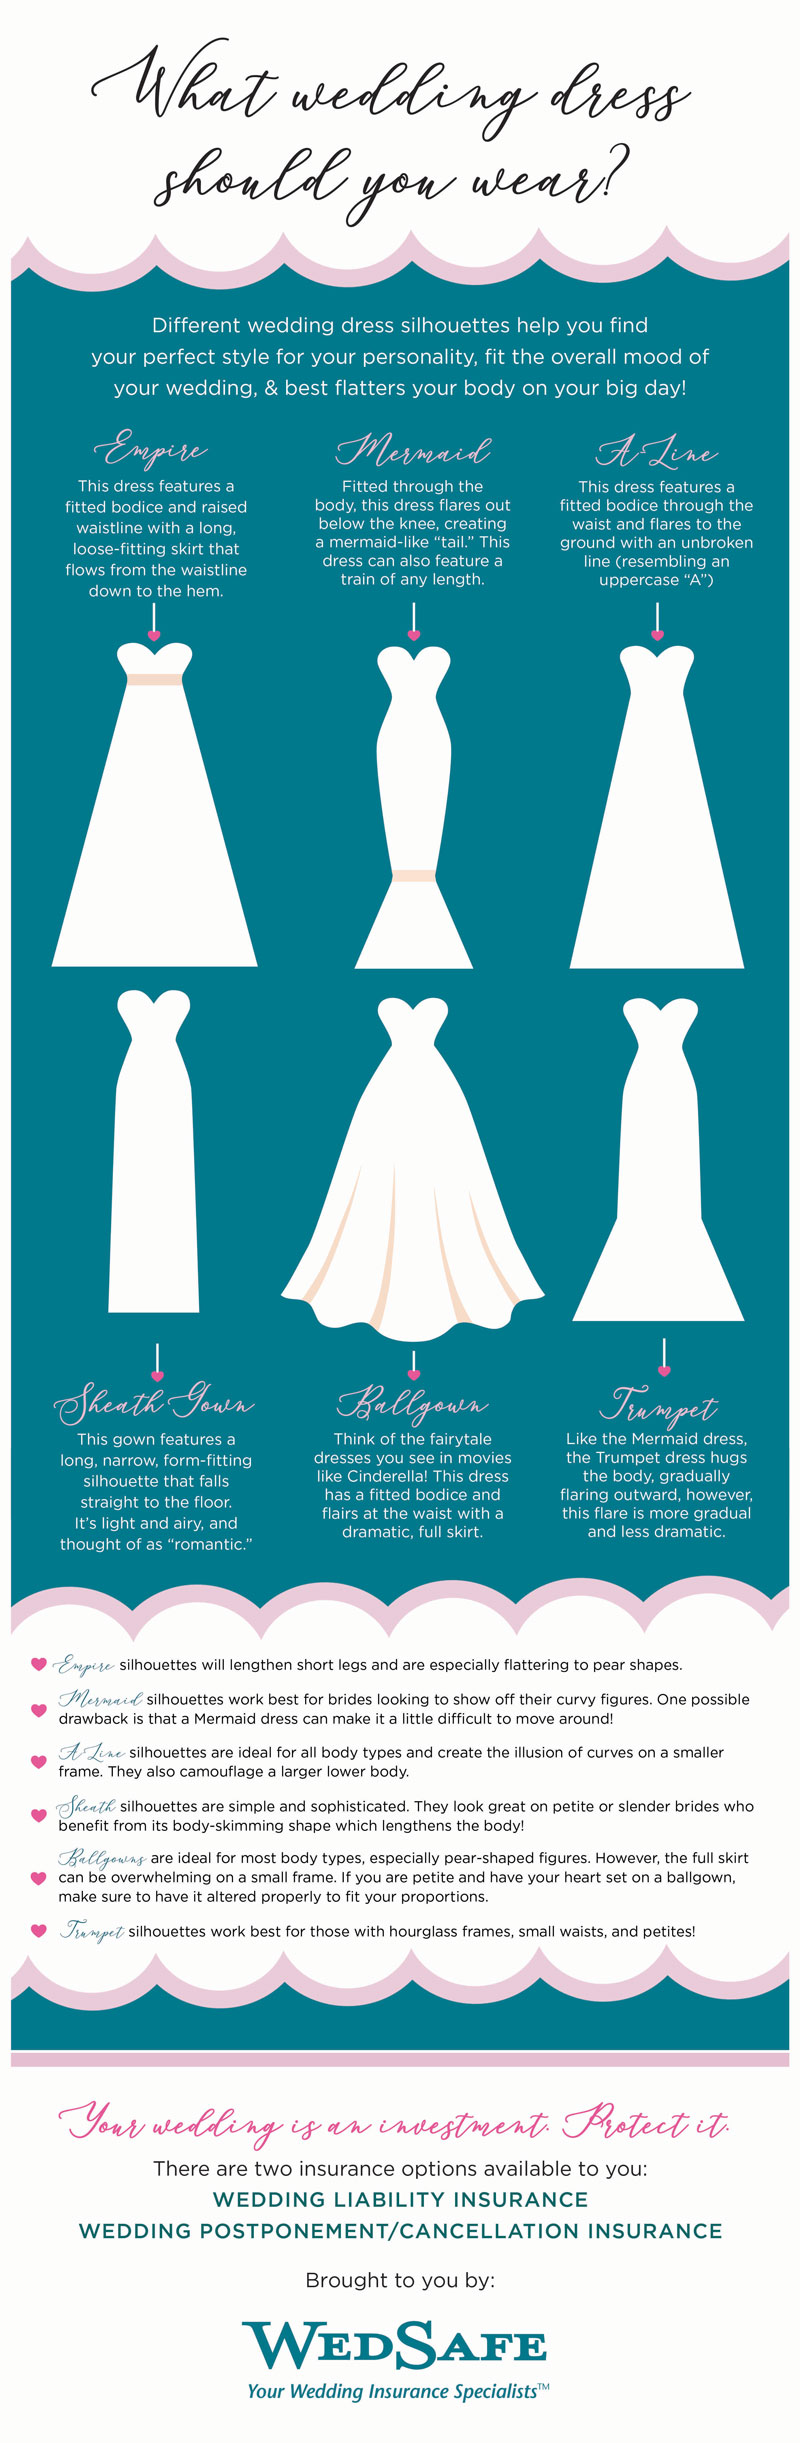 Wedding Dress Styles - An Overview and 6 Bonus Tips for Selecting the Perfect Wedding Dress!